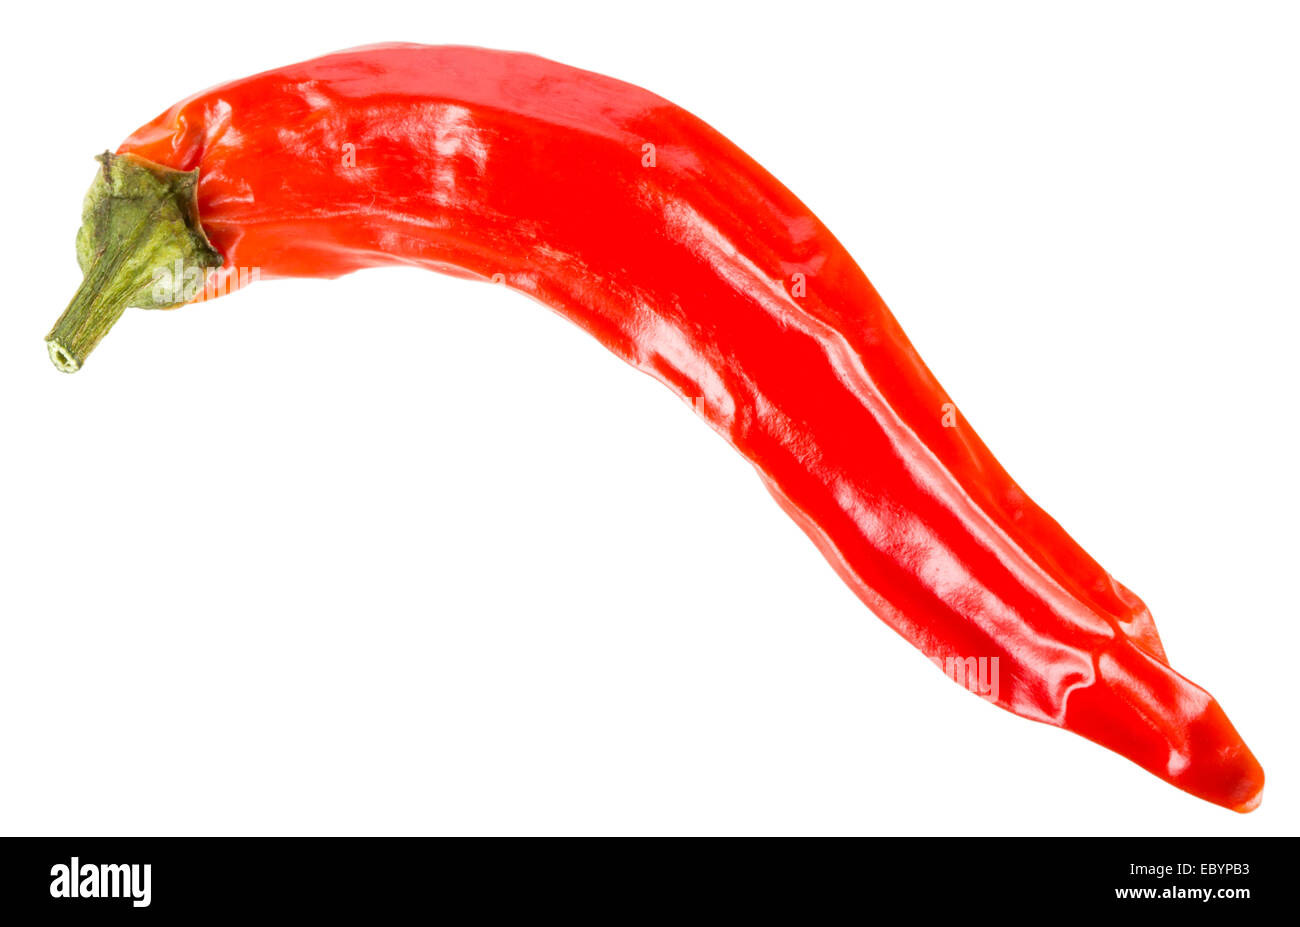 Dried red chili pepper isolated on white with clipping path Stock Photo